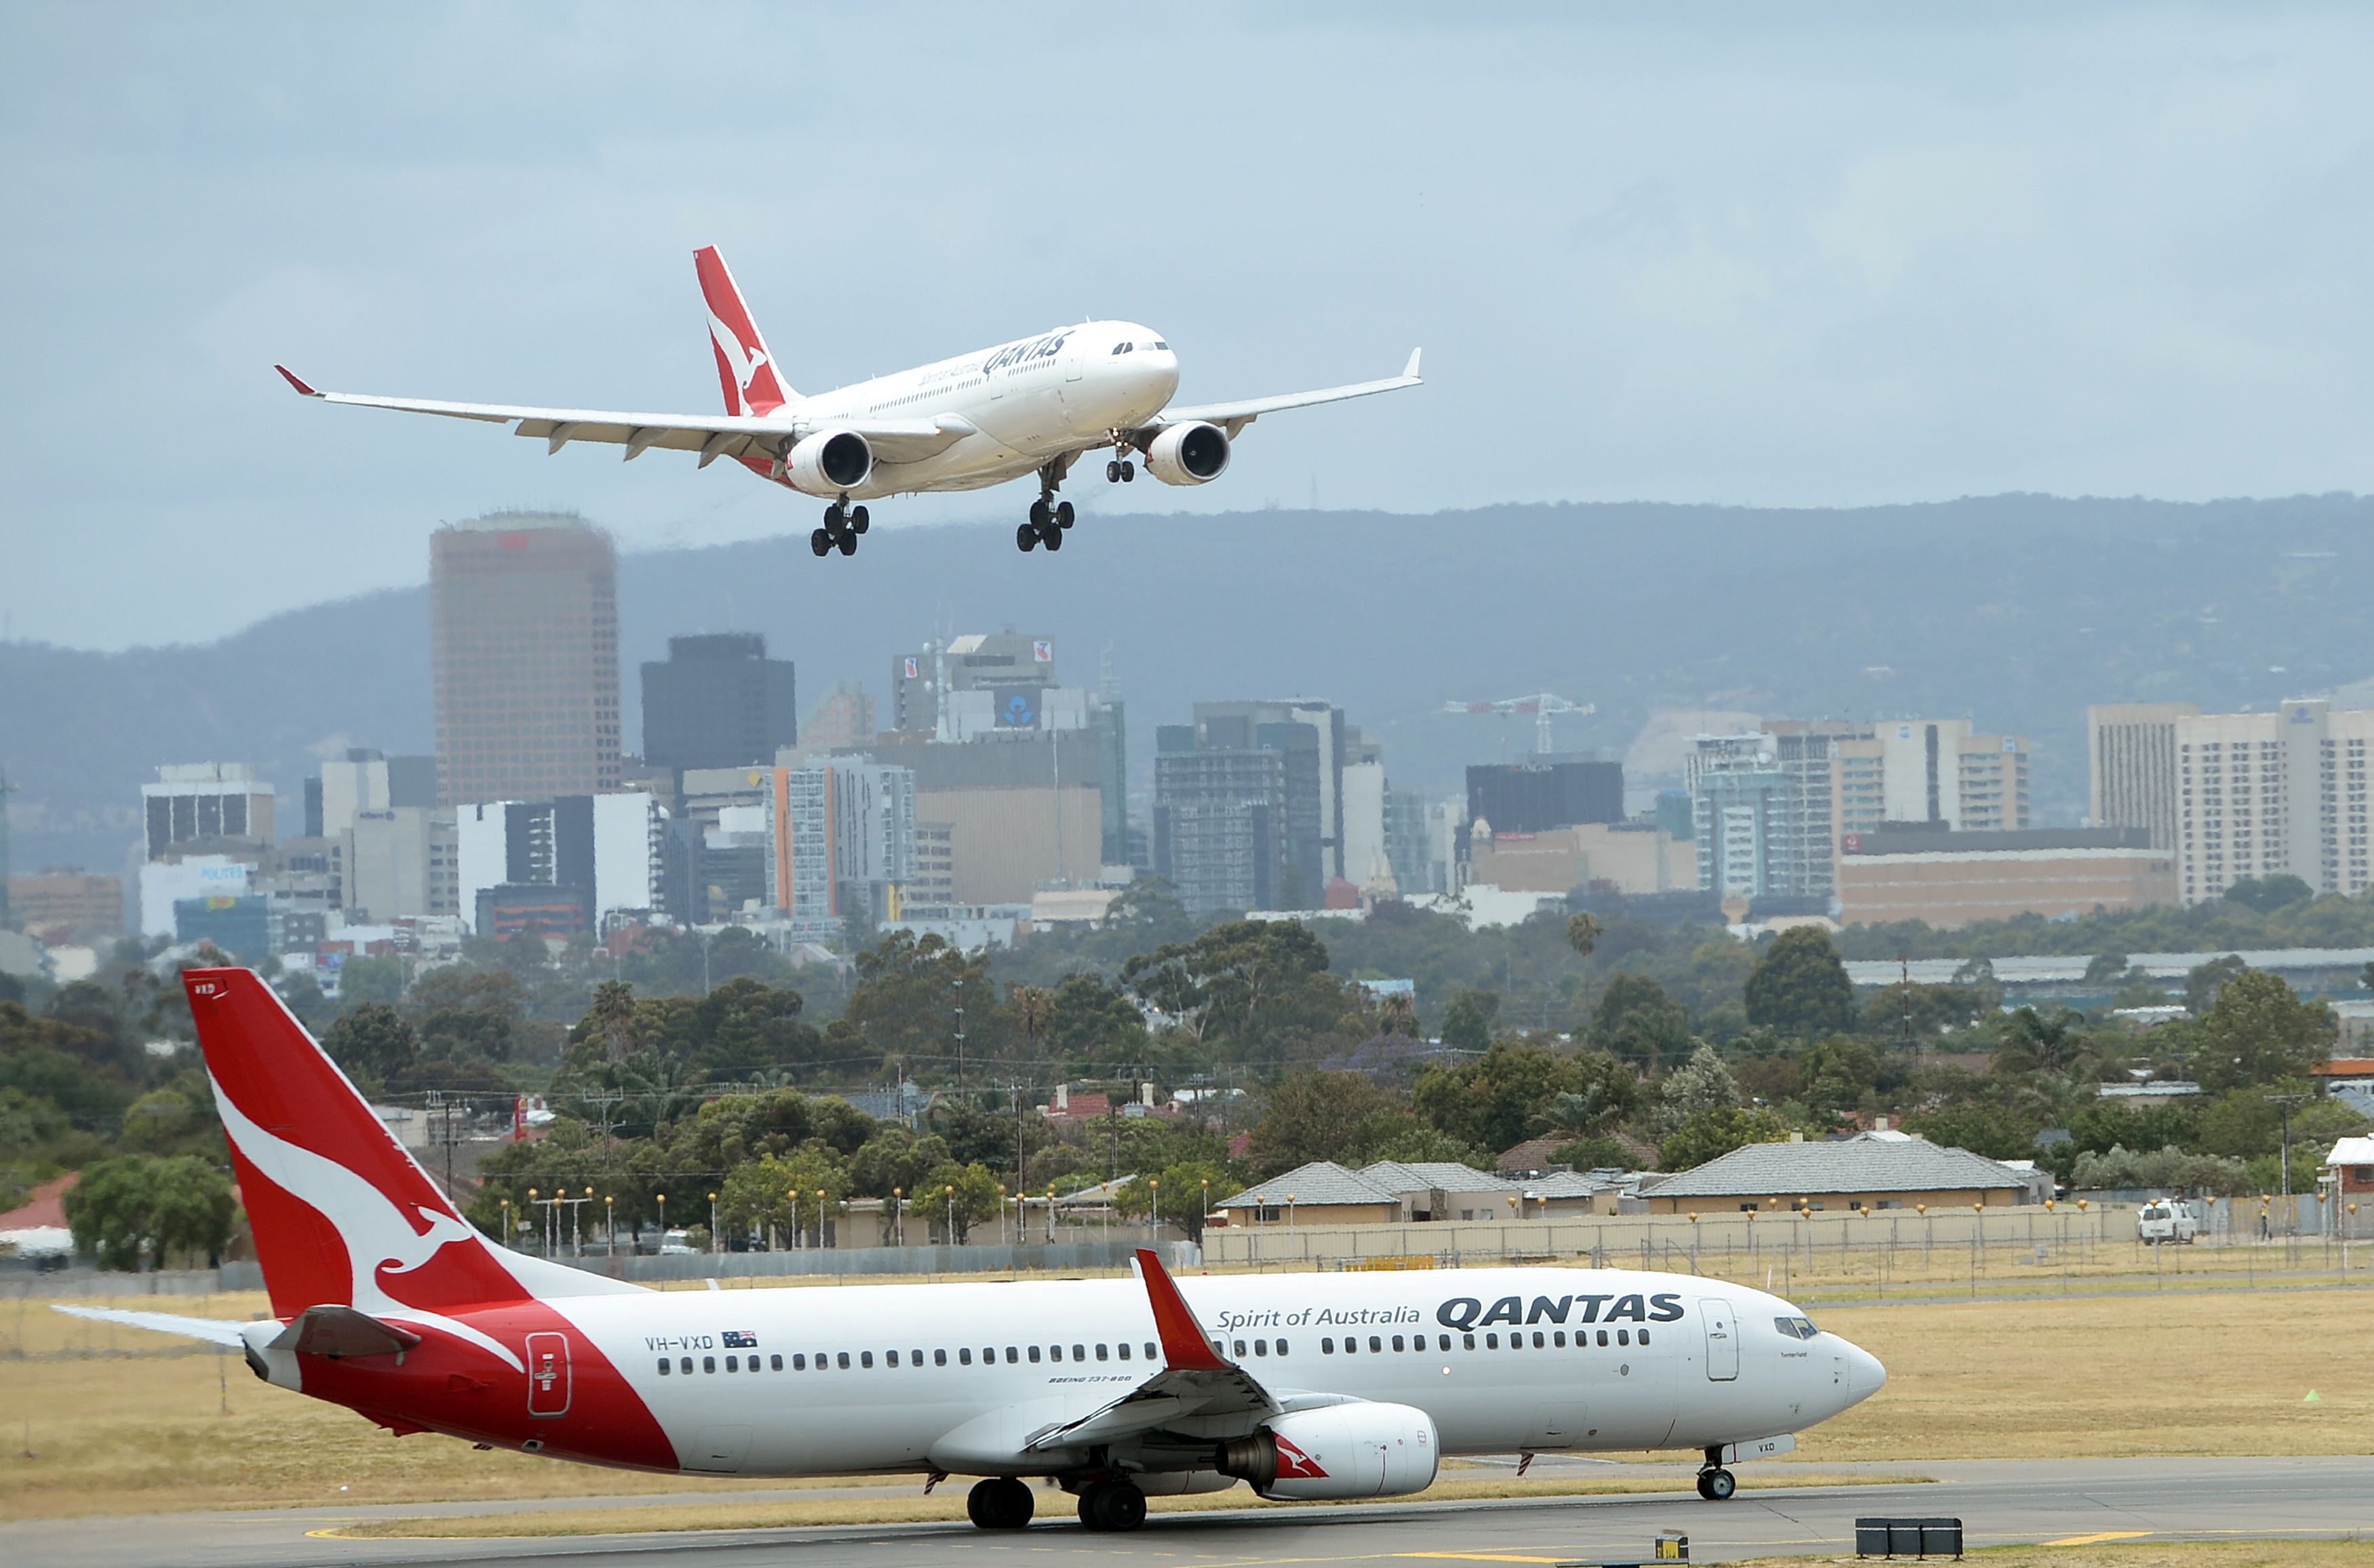 Qantas will offer a flurry of points plane flights across 6 weeks